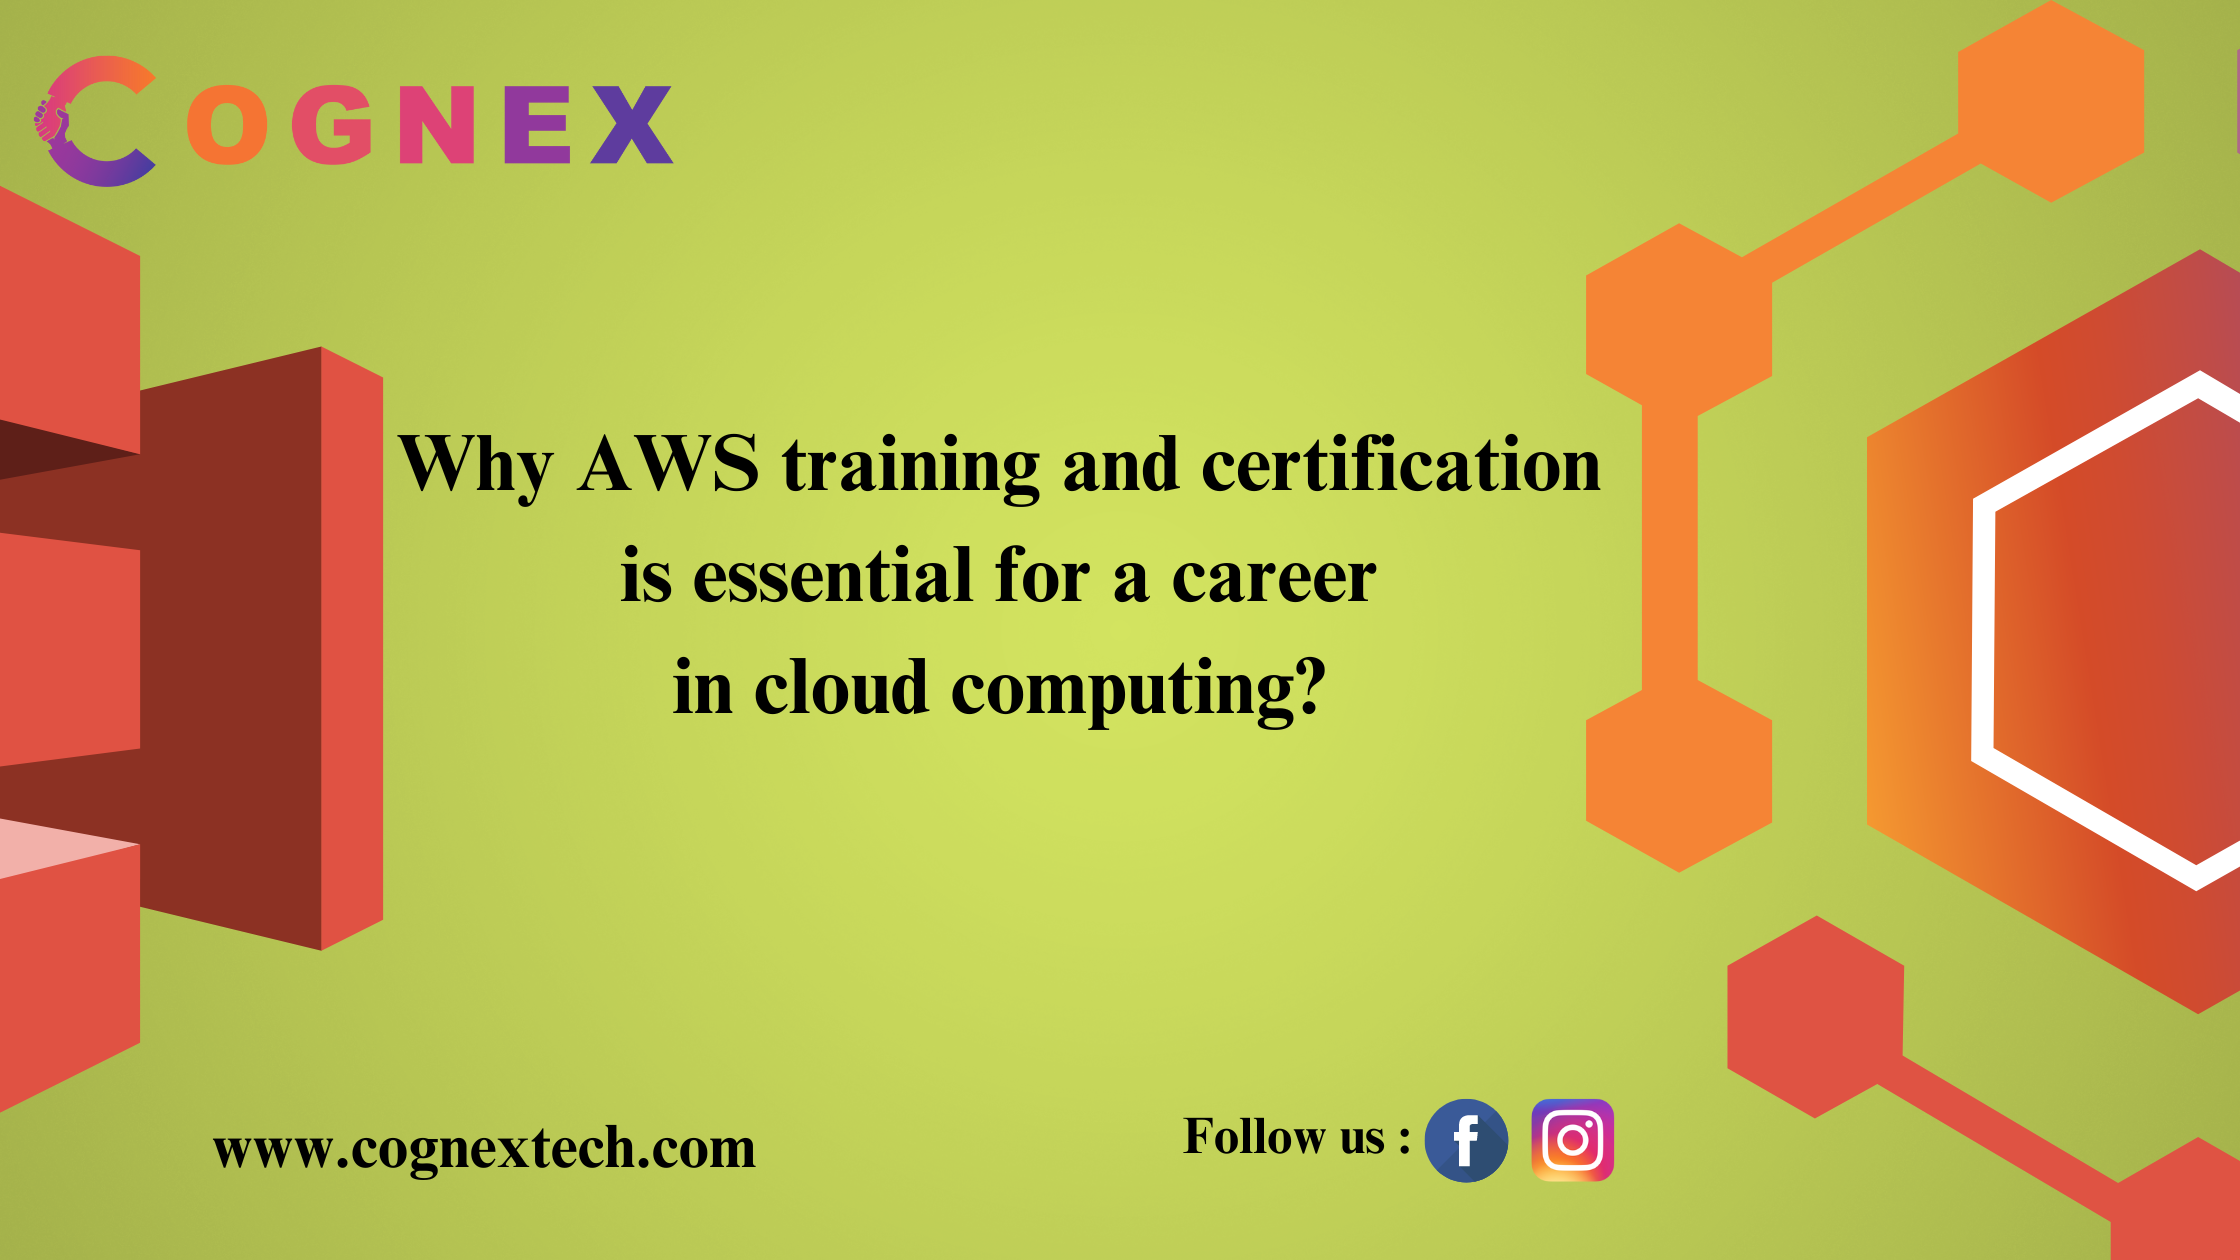 Why AWS training and certification course is essential for a career in cloud computing?